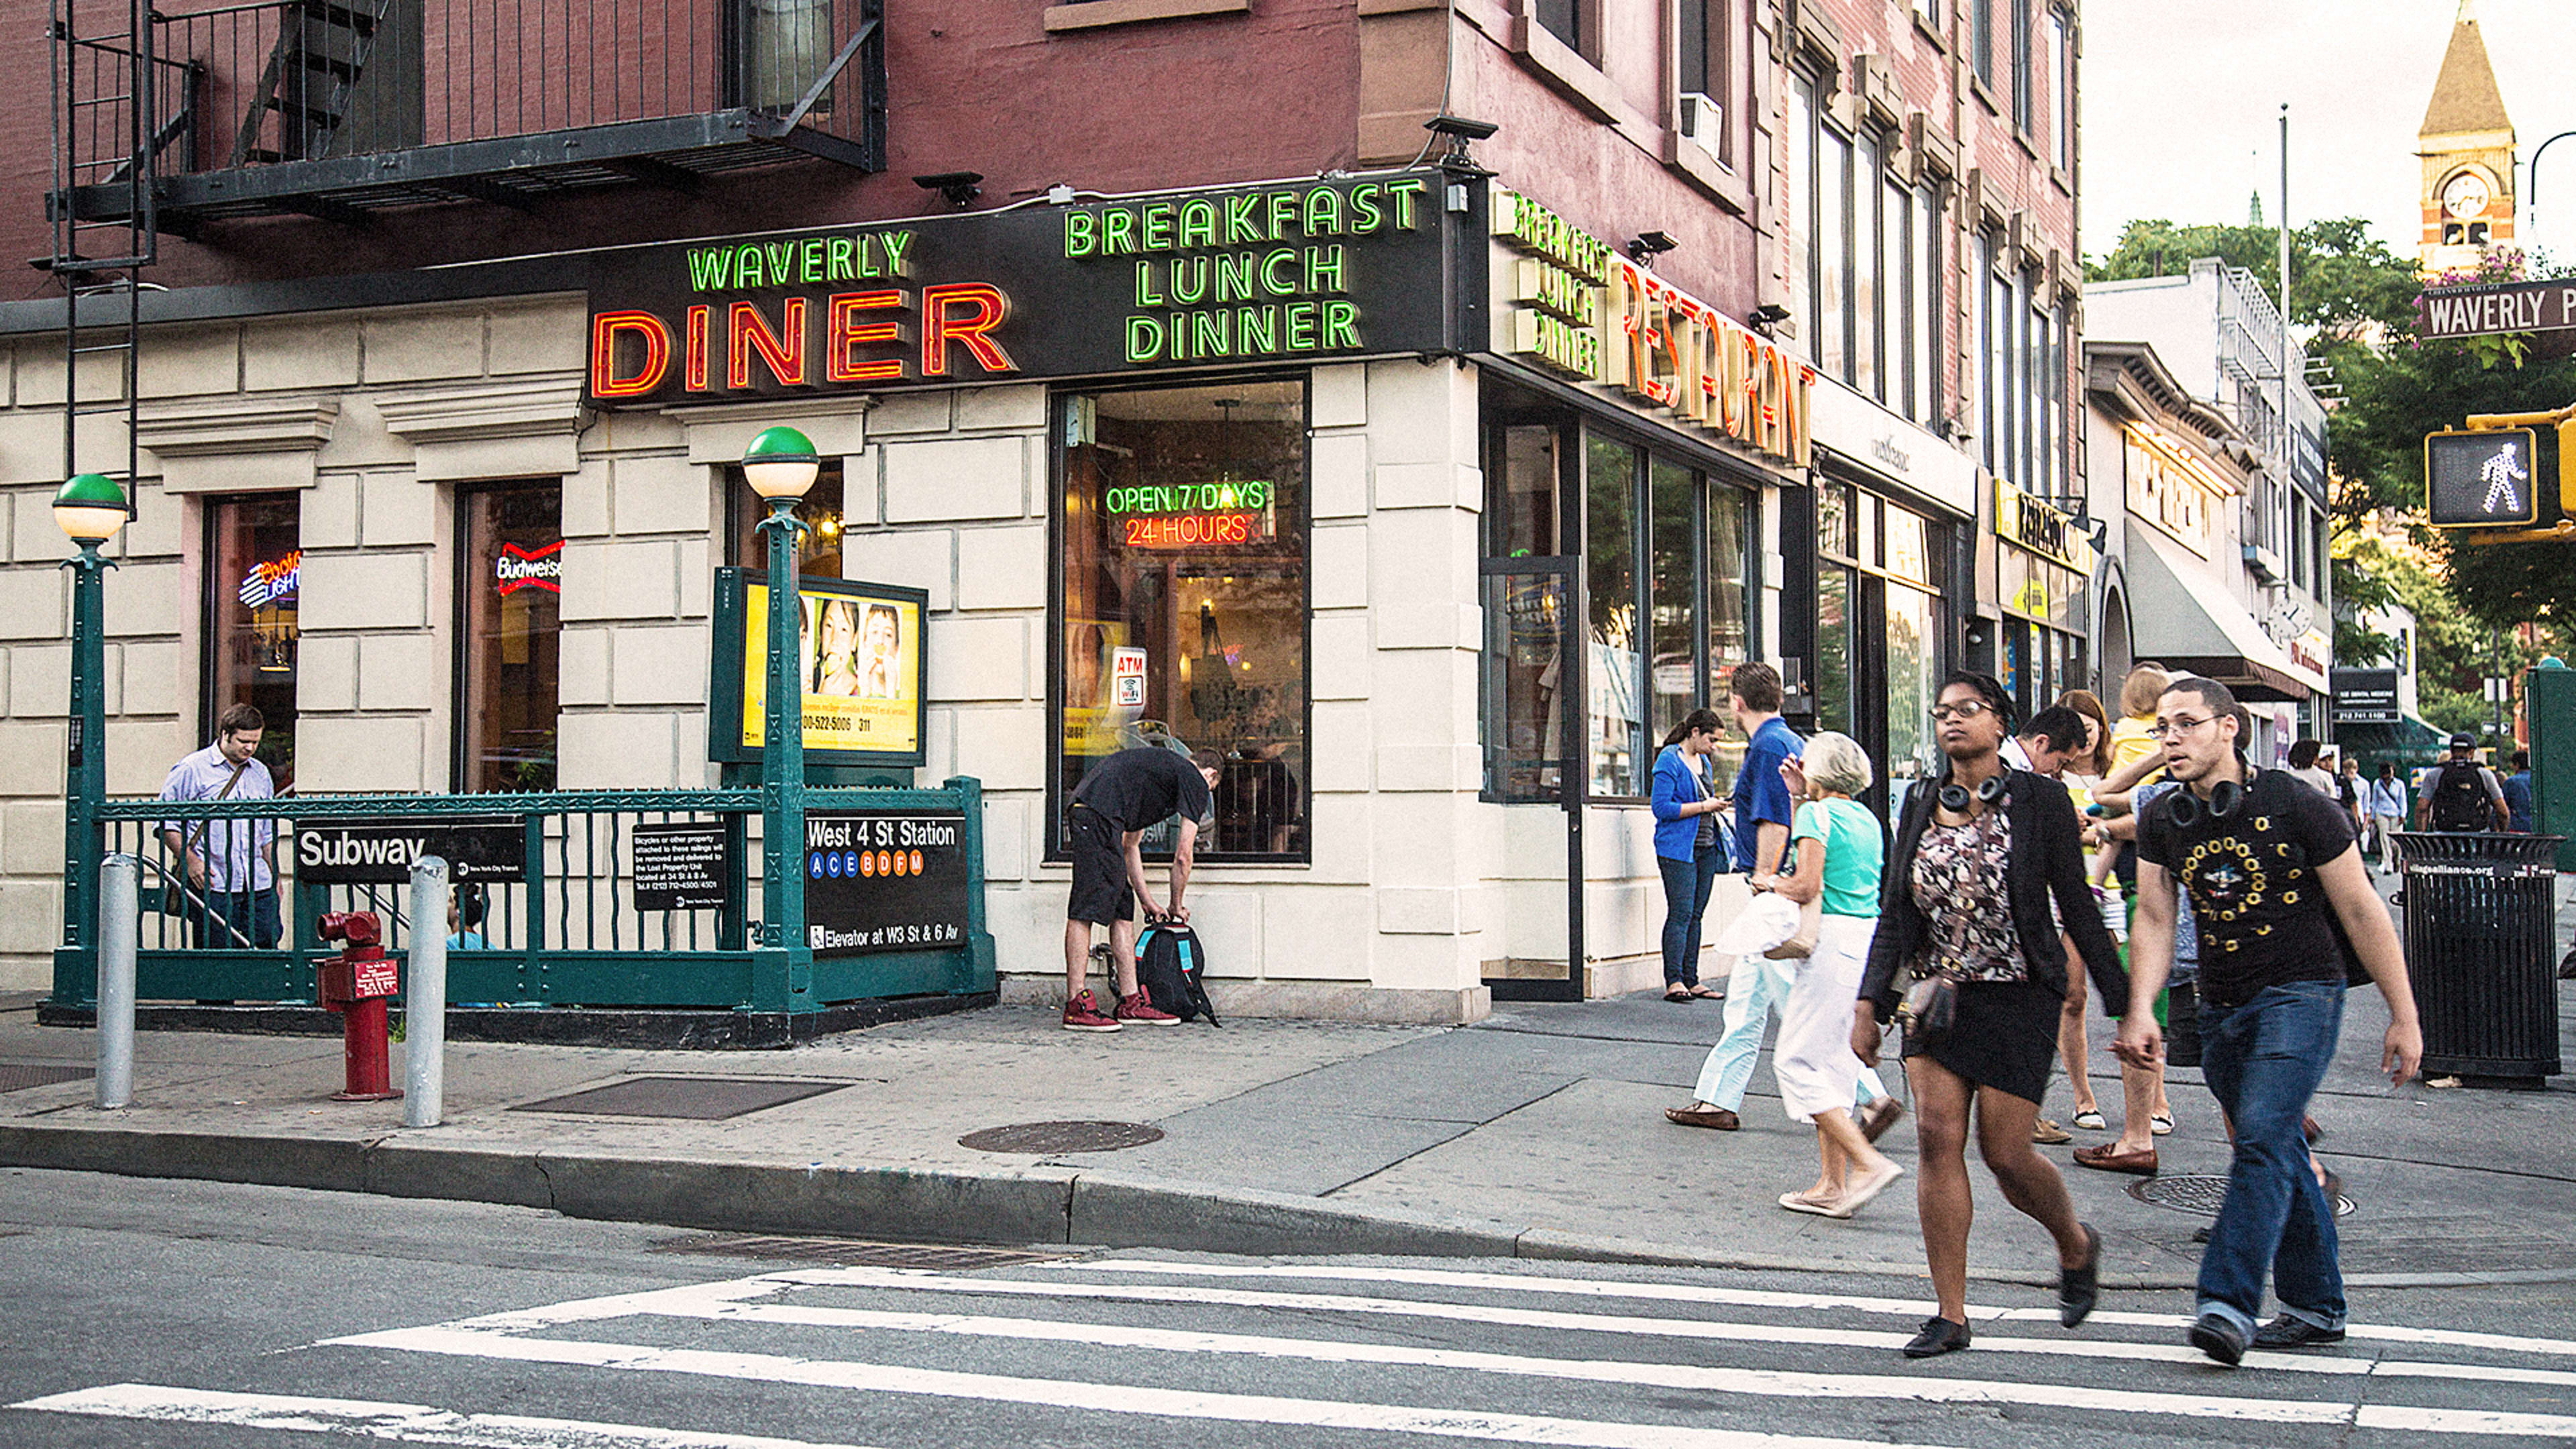 The 10 Most Walkable Cities In The U.S.